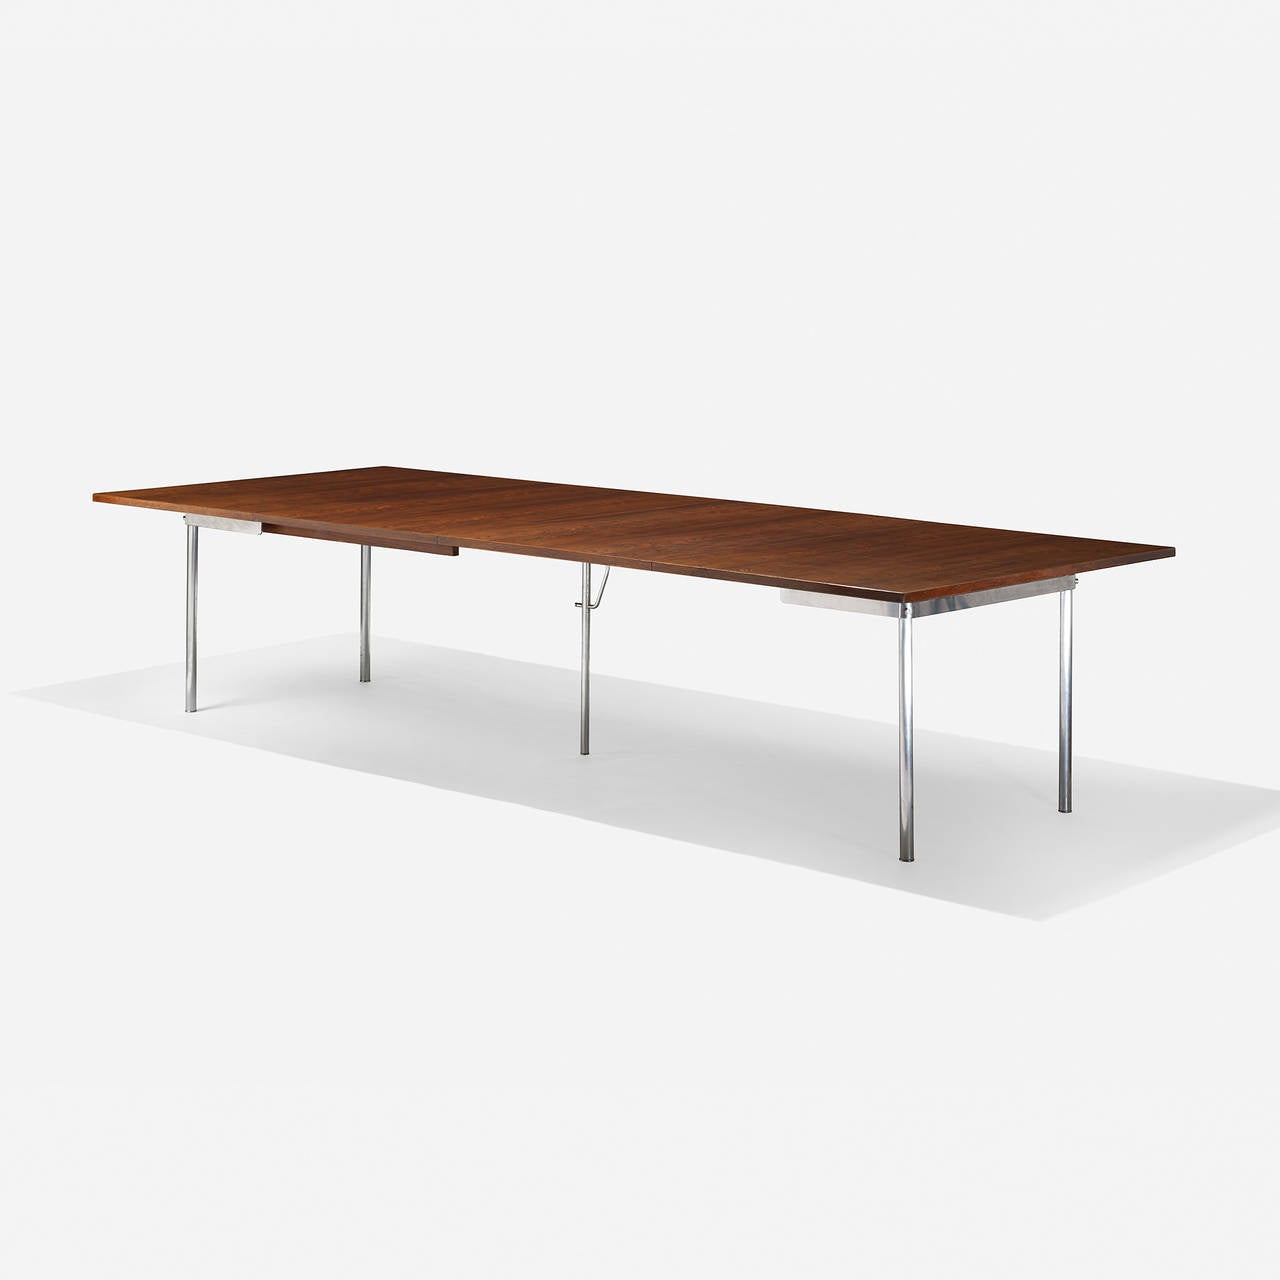 Sold with two 31.5-inch leaves; table measures sixty-three inches when not fully extended. Signed with branded manufacturer's mark to underside: [Andr. Tuck Design Hans J. Wegner Made in Denmark]. Sold with a copy of the original invoice.